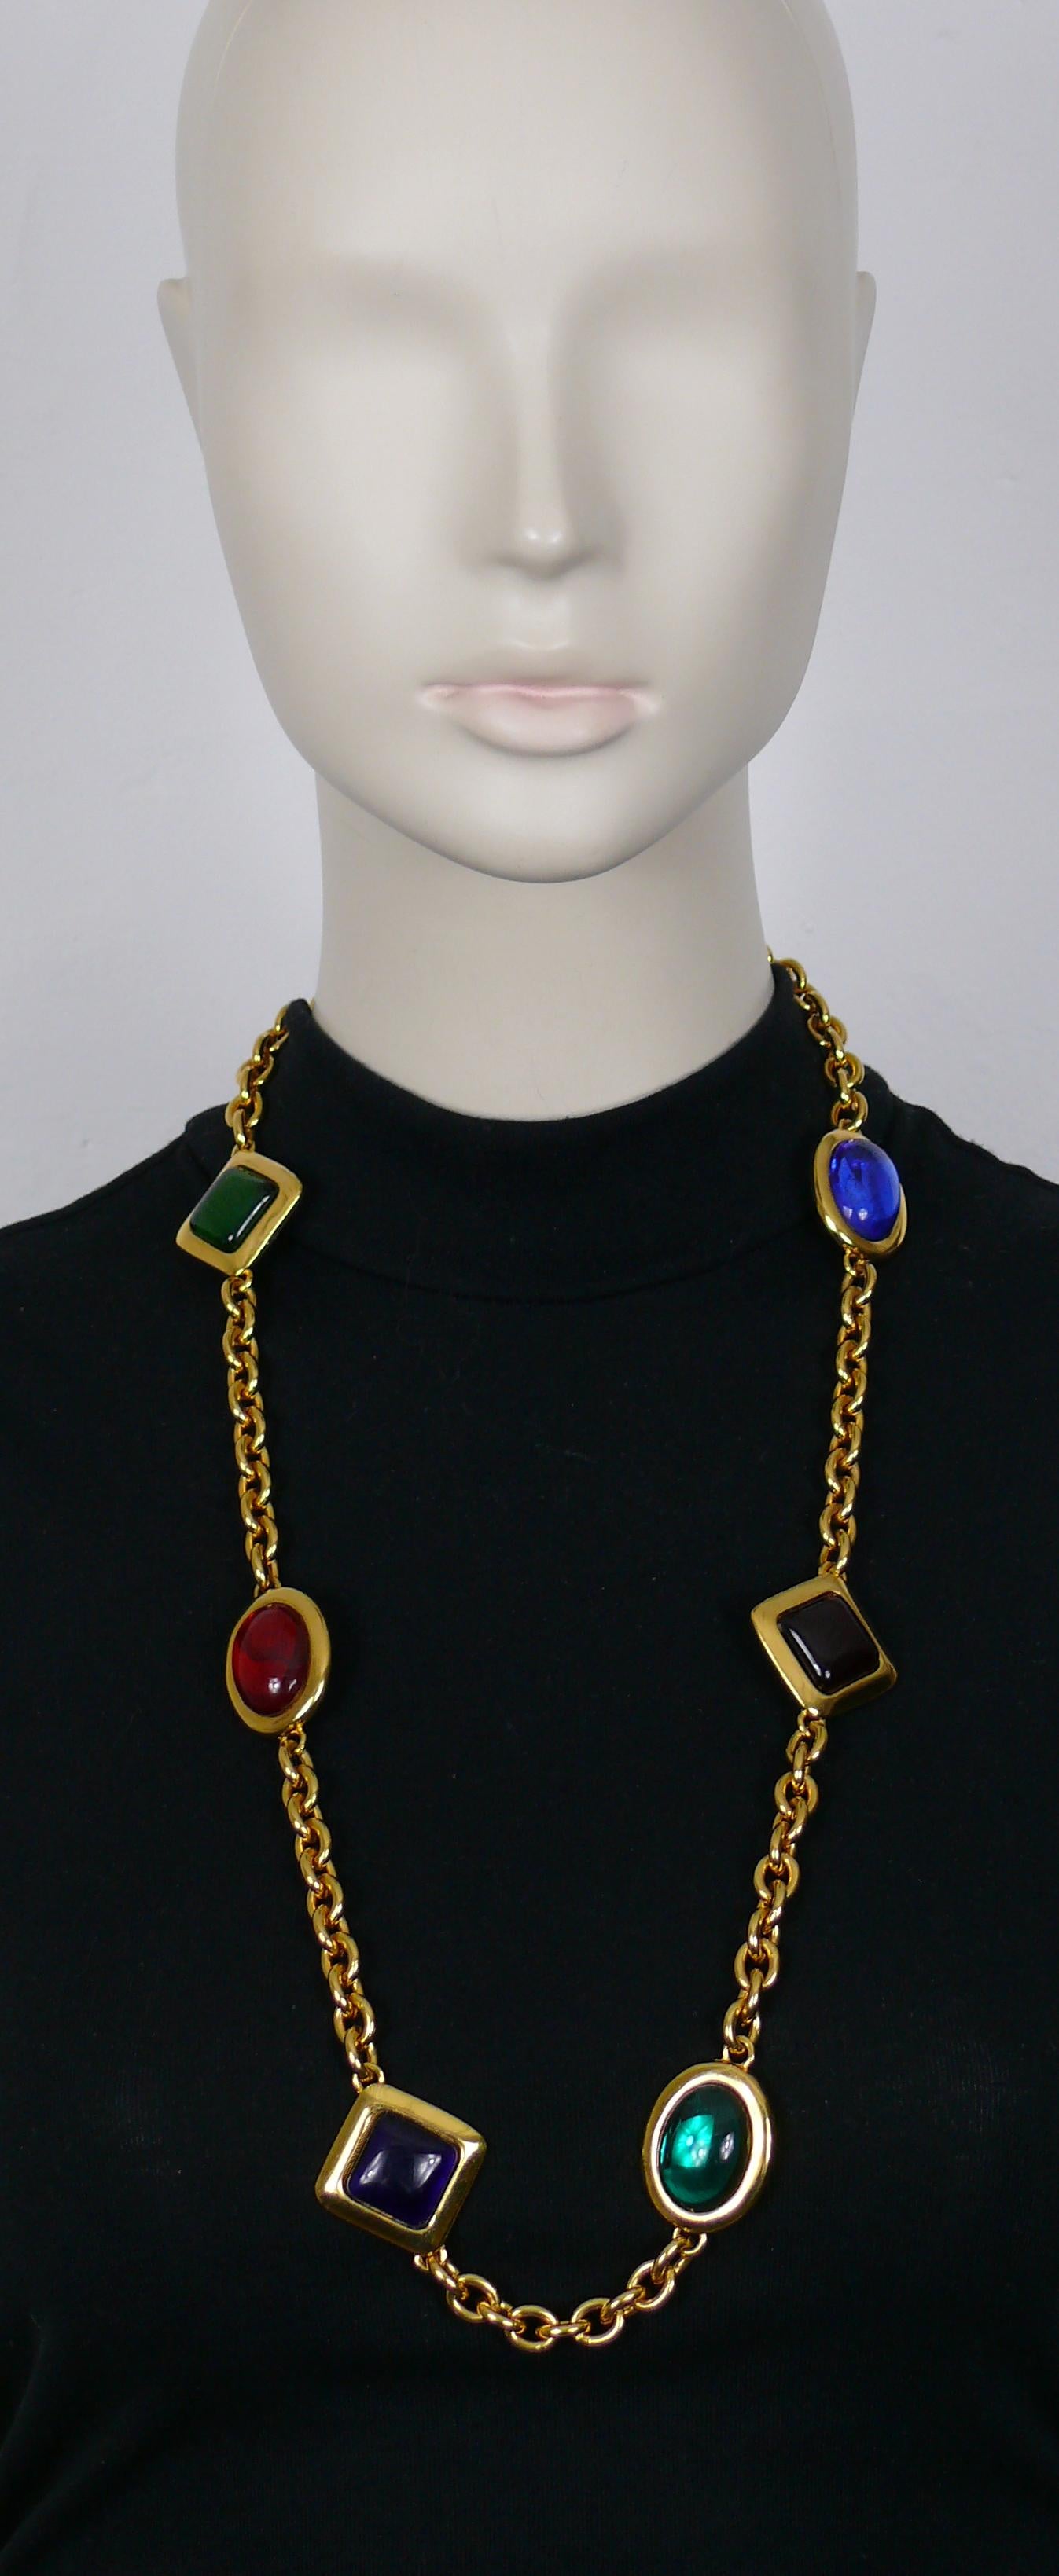 CELINE vintage gold tone chain necklace featuring multicolored glass cabochons.

Can be worn as a belt.

Toggle T-bar closure.

Embossed CELINE PARIS Made in France.

Indicative measurements : length approx. 77 cm (30.31 inches).

Material : Gold